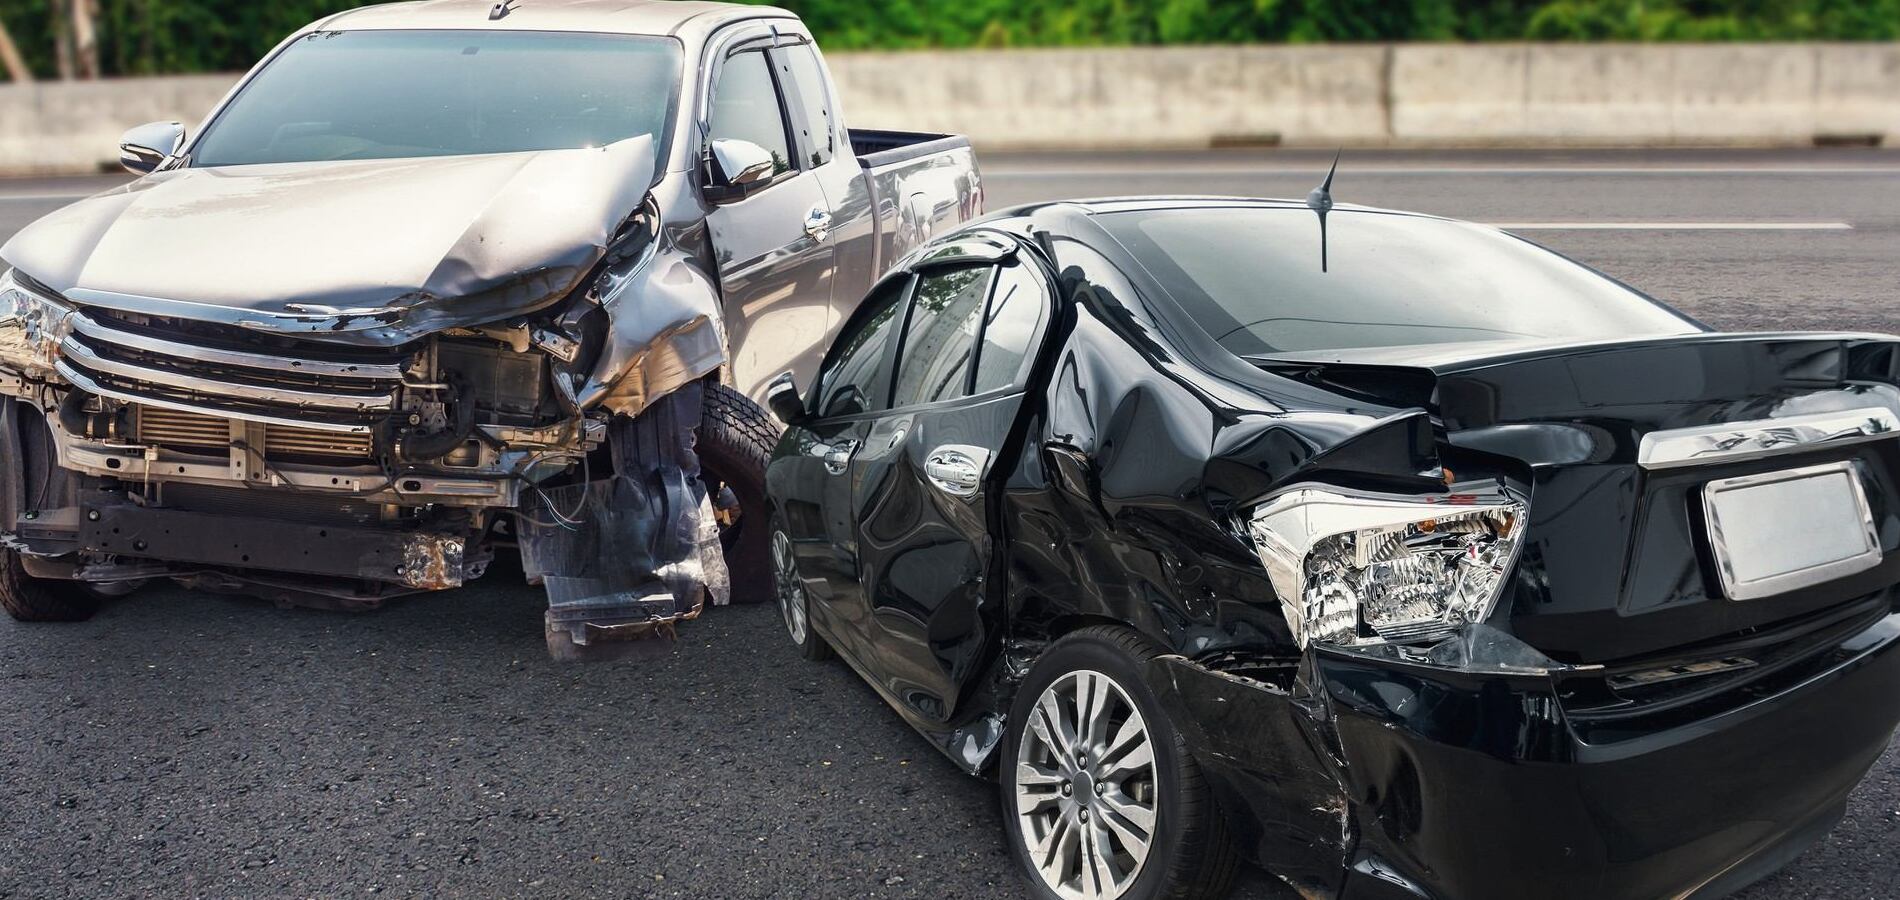 Car Accident Lawyer in Dana Point, CA